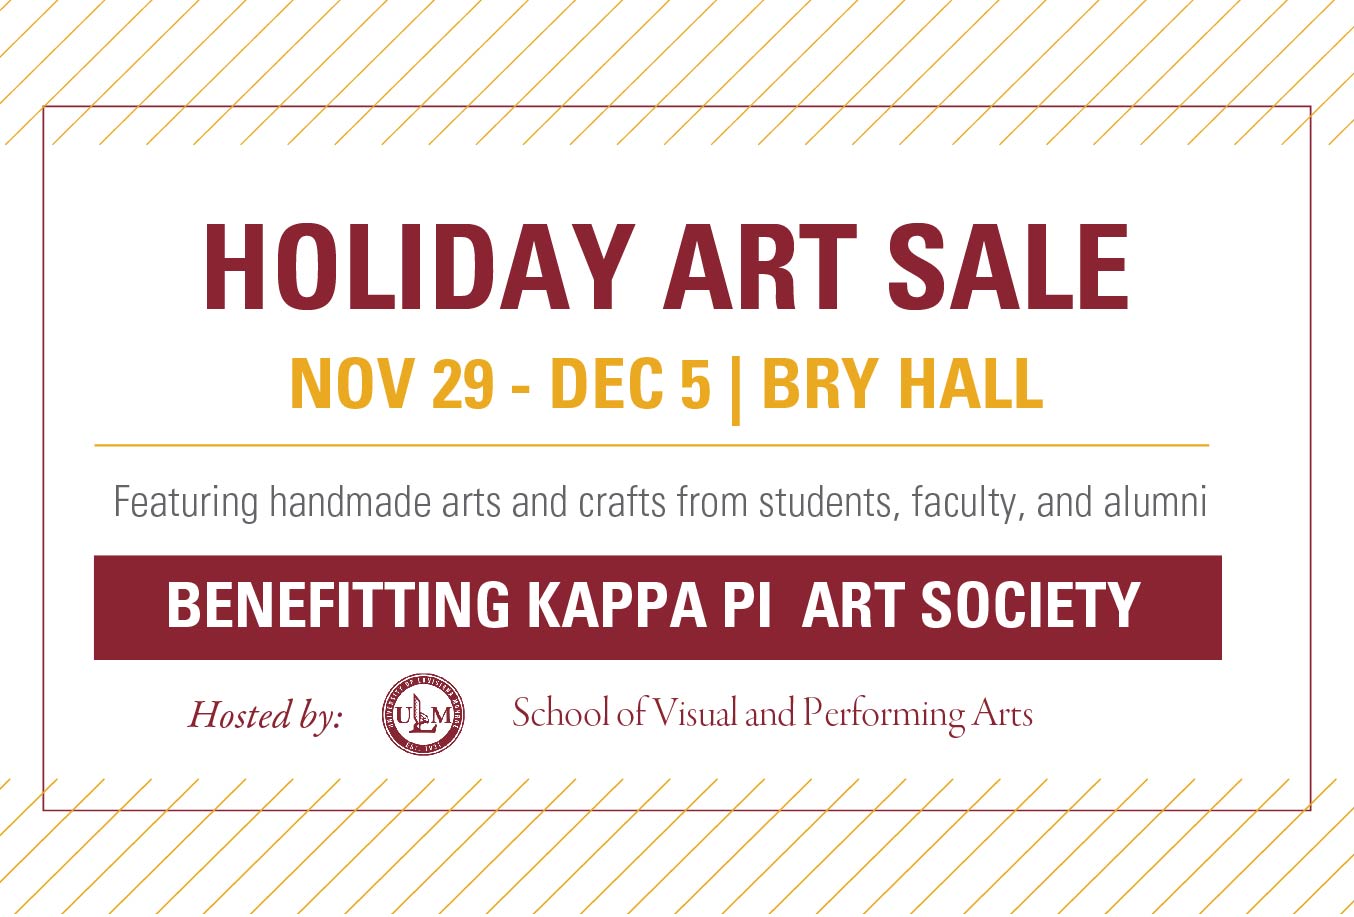 ULM School of Visual and Performing Arts hosts annual holiday art sale